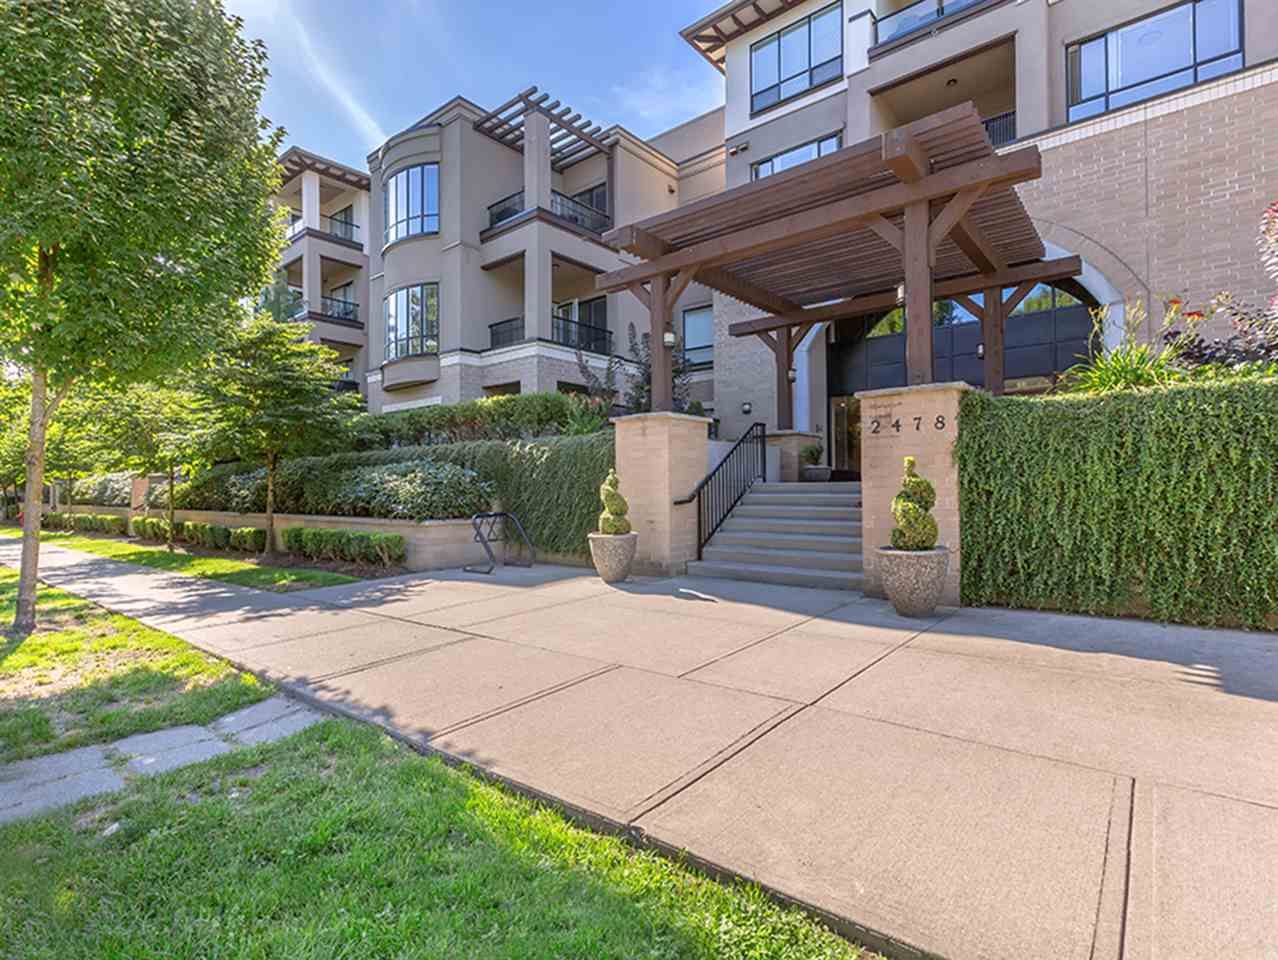 Main Photo: 112 2478 WELCHER AVENUE in : Central Pt Coquitlam Condo for sale : MLS®# R2195154